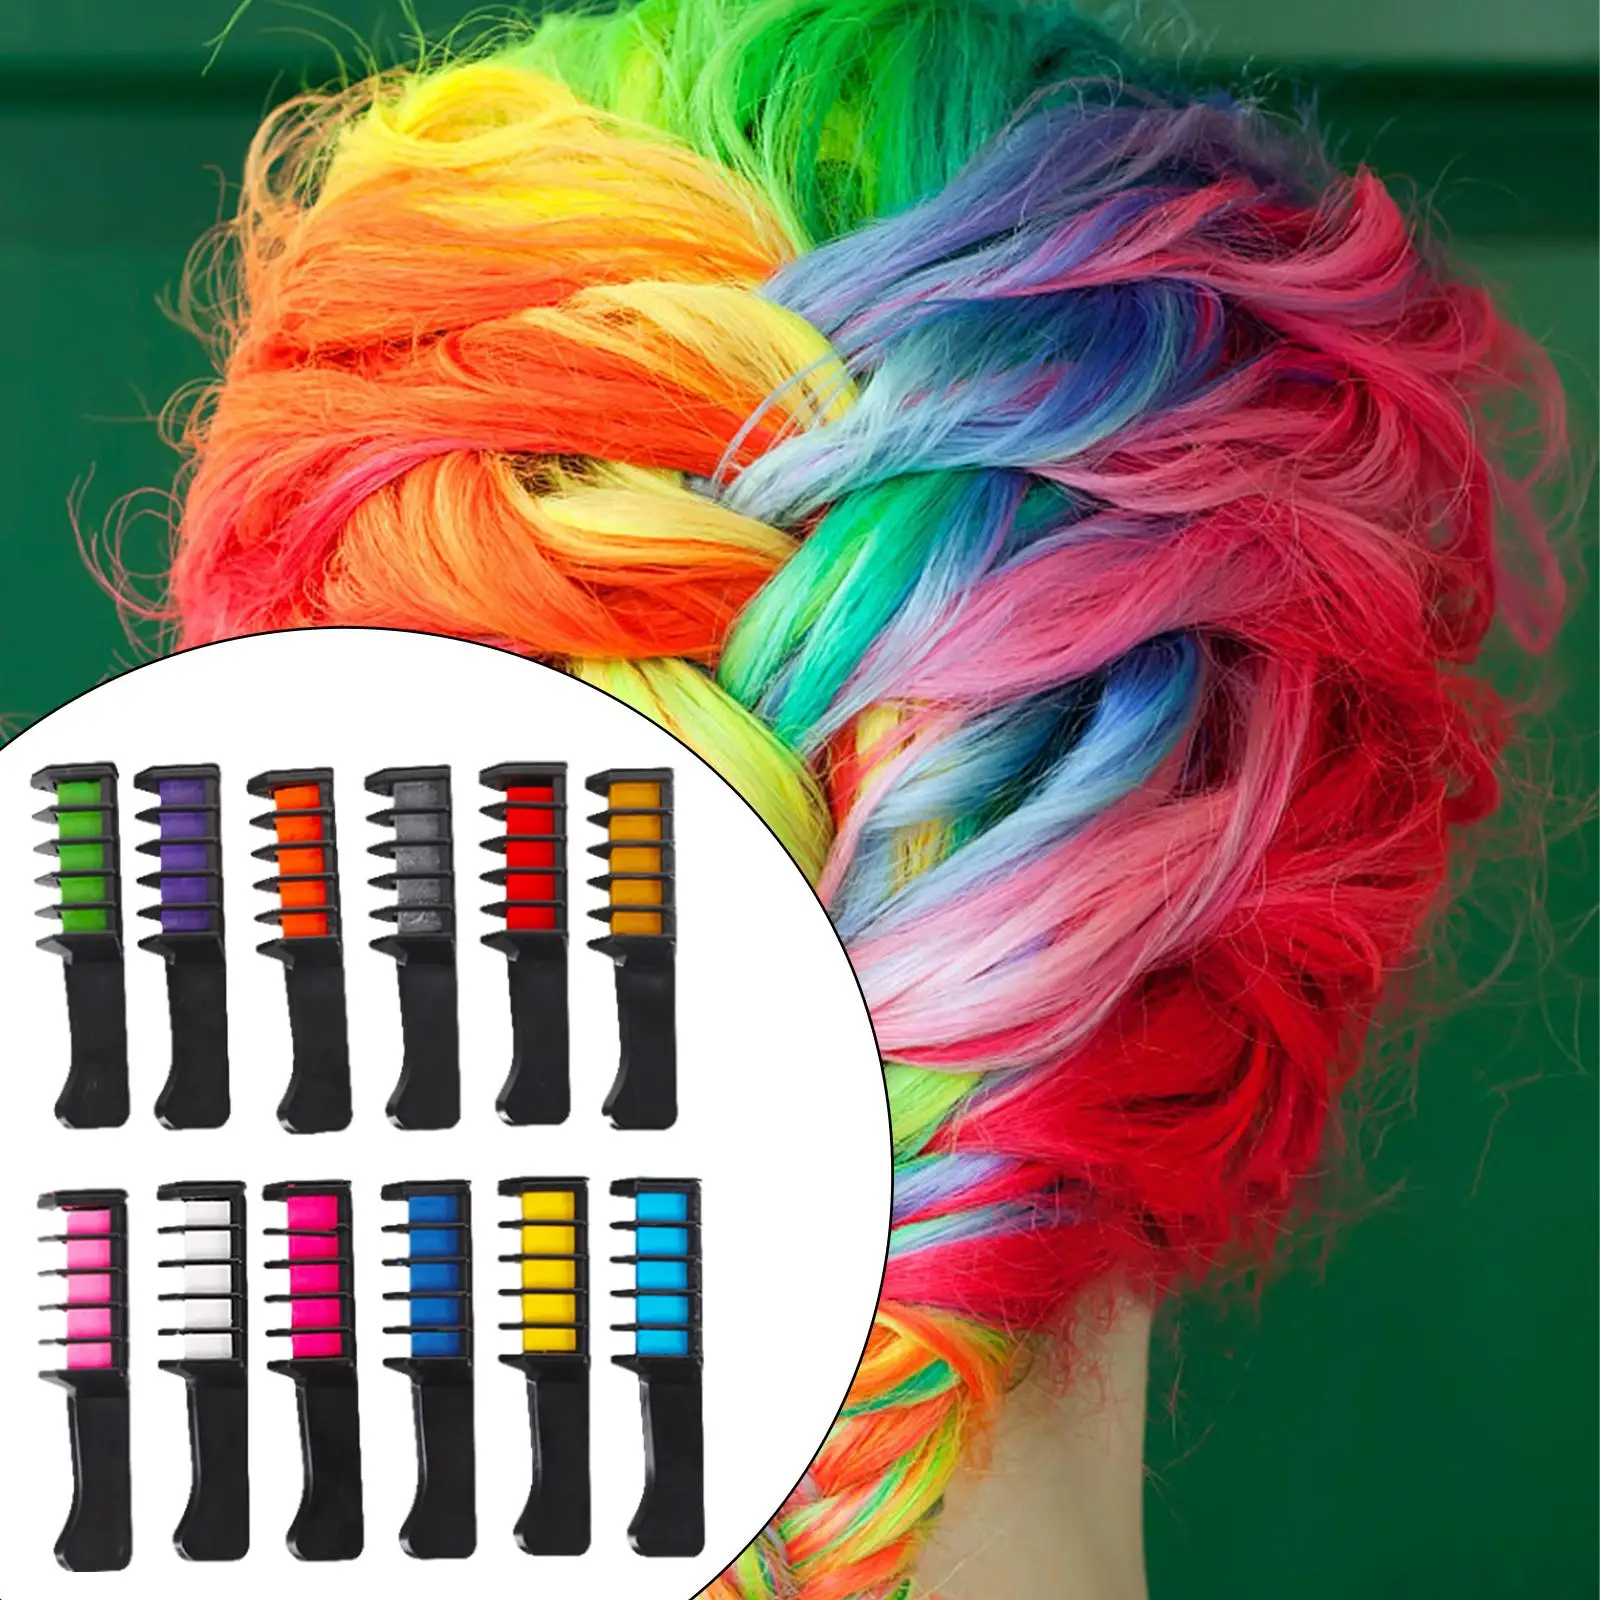 12x Disposable Hair Dyeing Combs DIY Easy to Clean Temporary Hair Color Chalk Comb for Festivals Party Cosplay Birthday Party